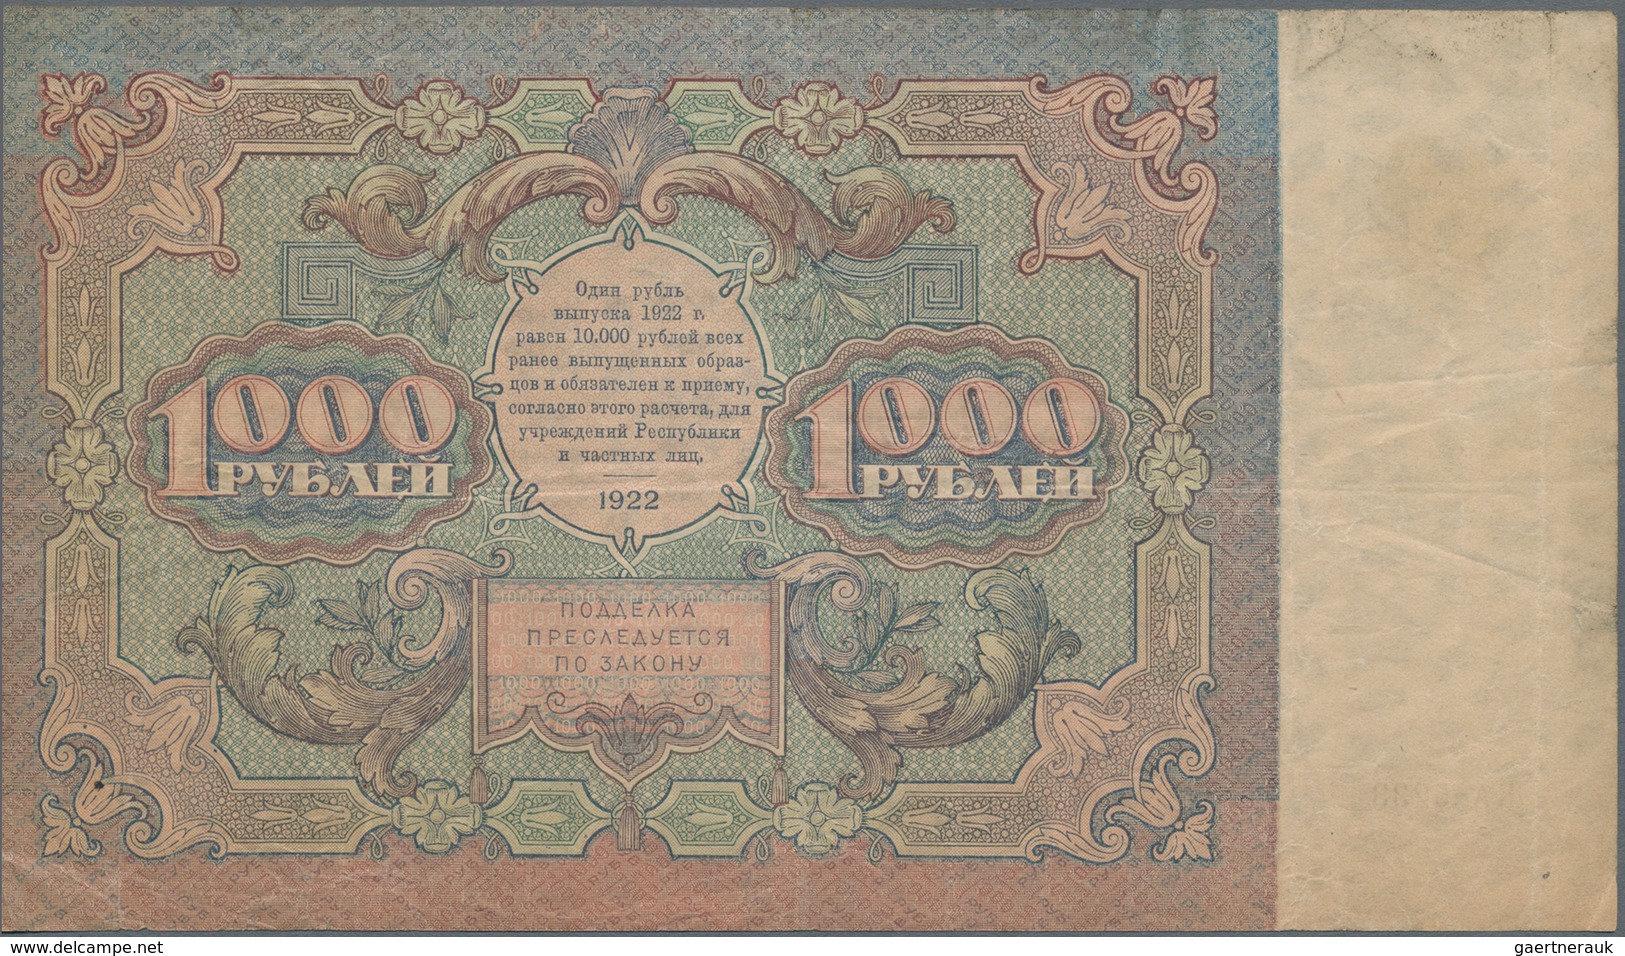 Russia / Russland: Pair Of The State Currency Notes Series 1922 With 500 Rubles With Cashier Signatu - Russland